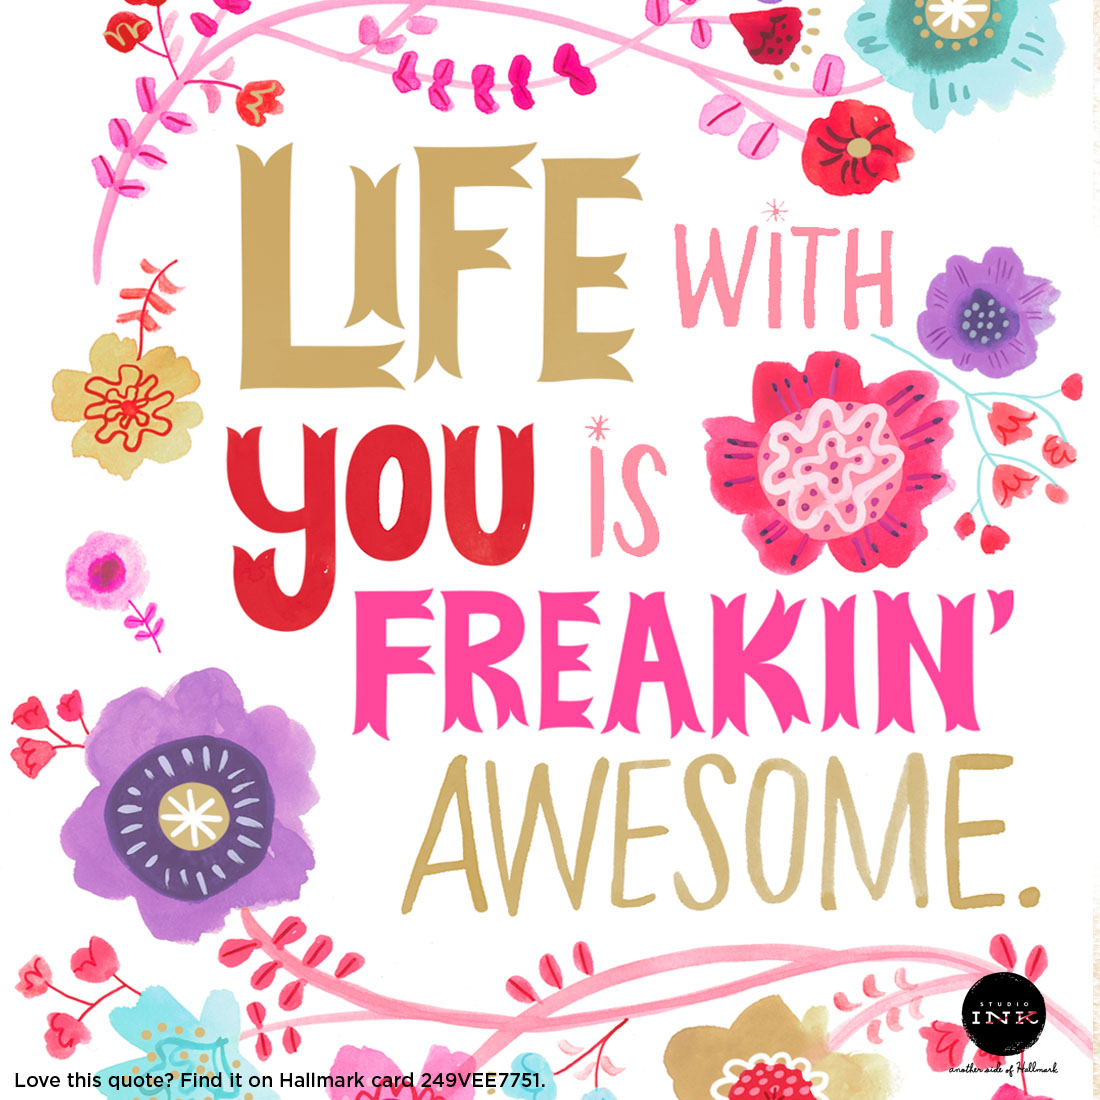 Valentine's Day Quotes: Life with You is Freakin' Awesome #MyHallmark #MyHallmarkIdeas